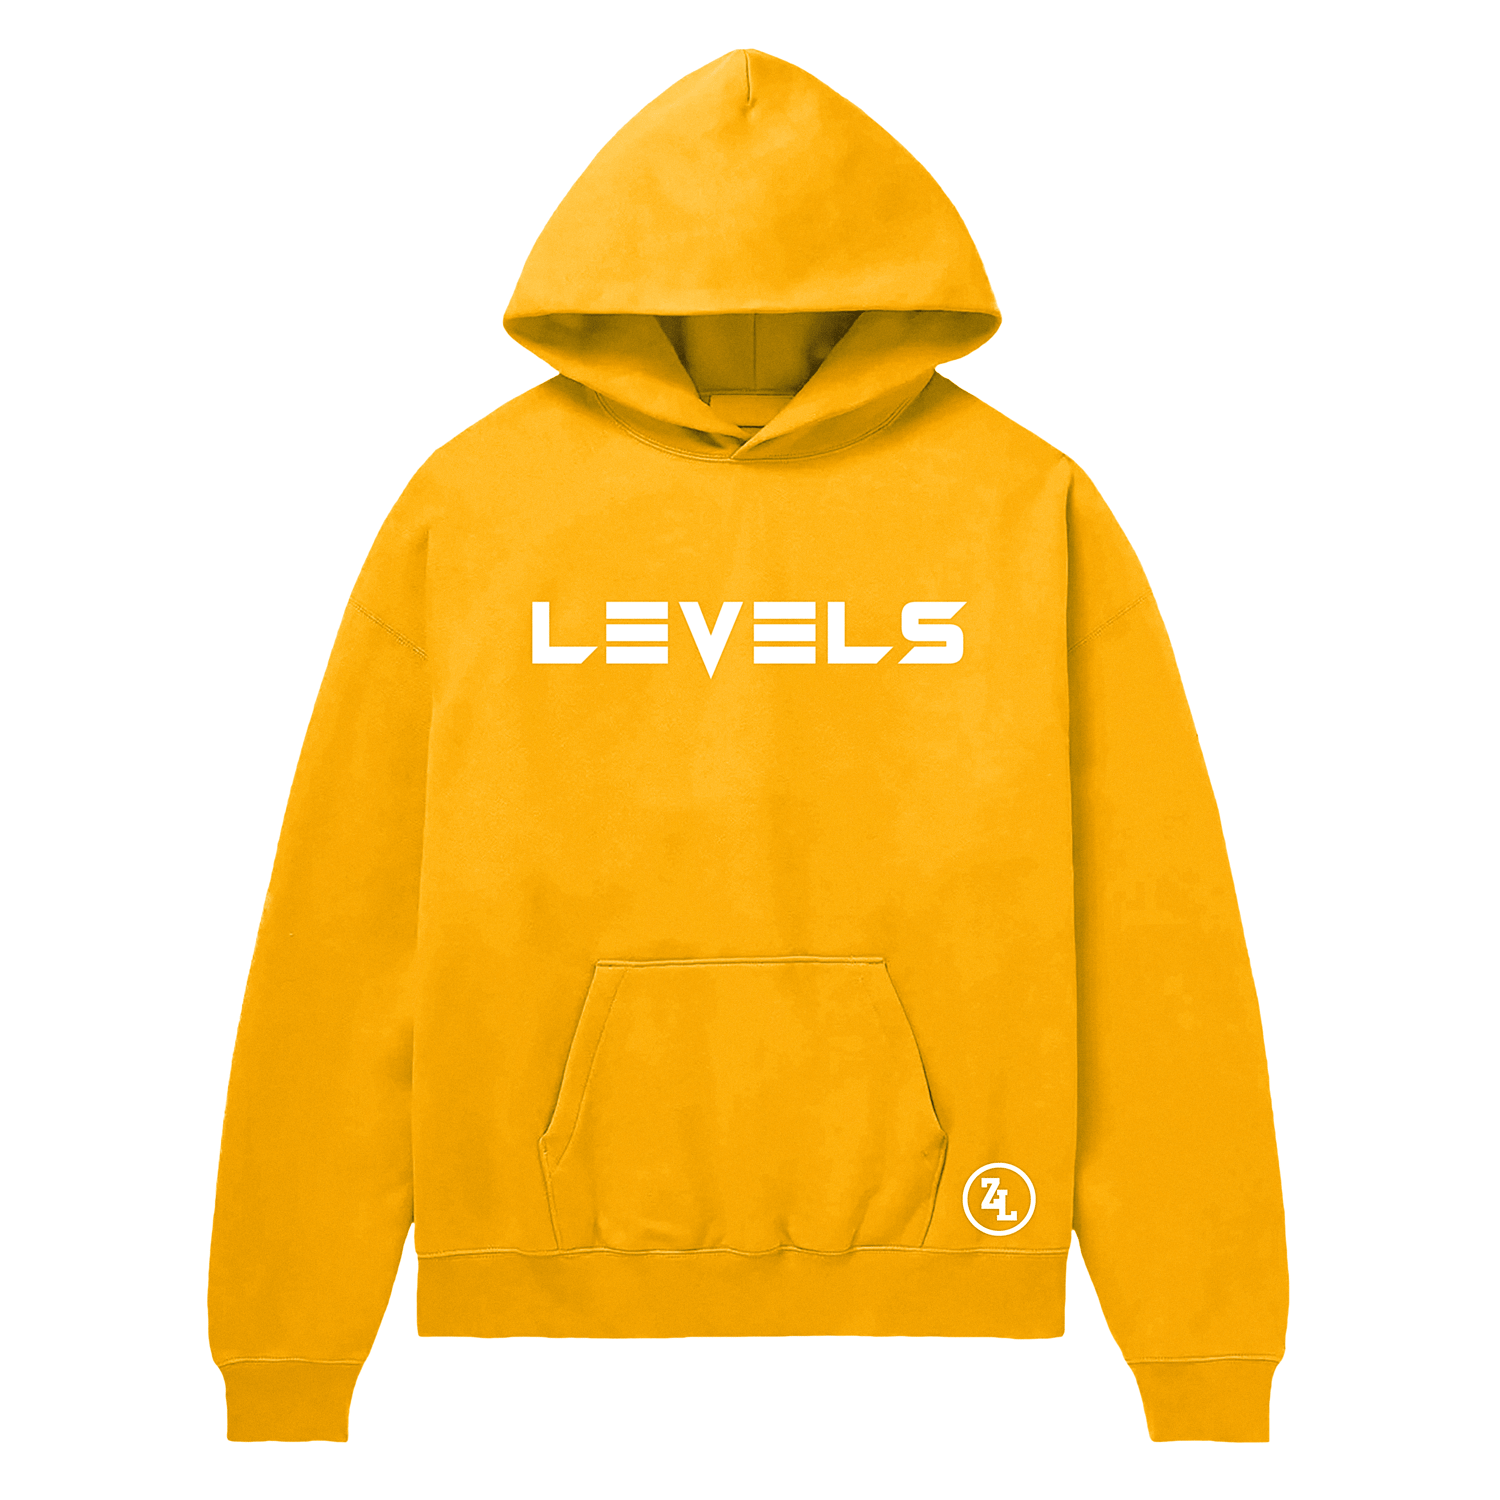 Image of "Levels" Hoodies (click for more colors)